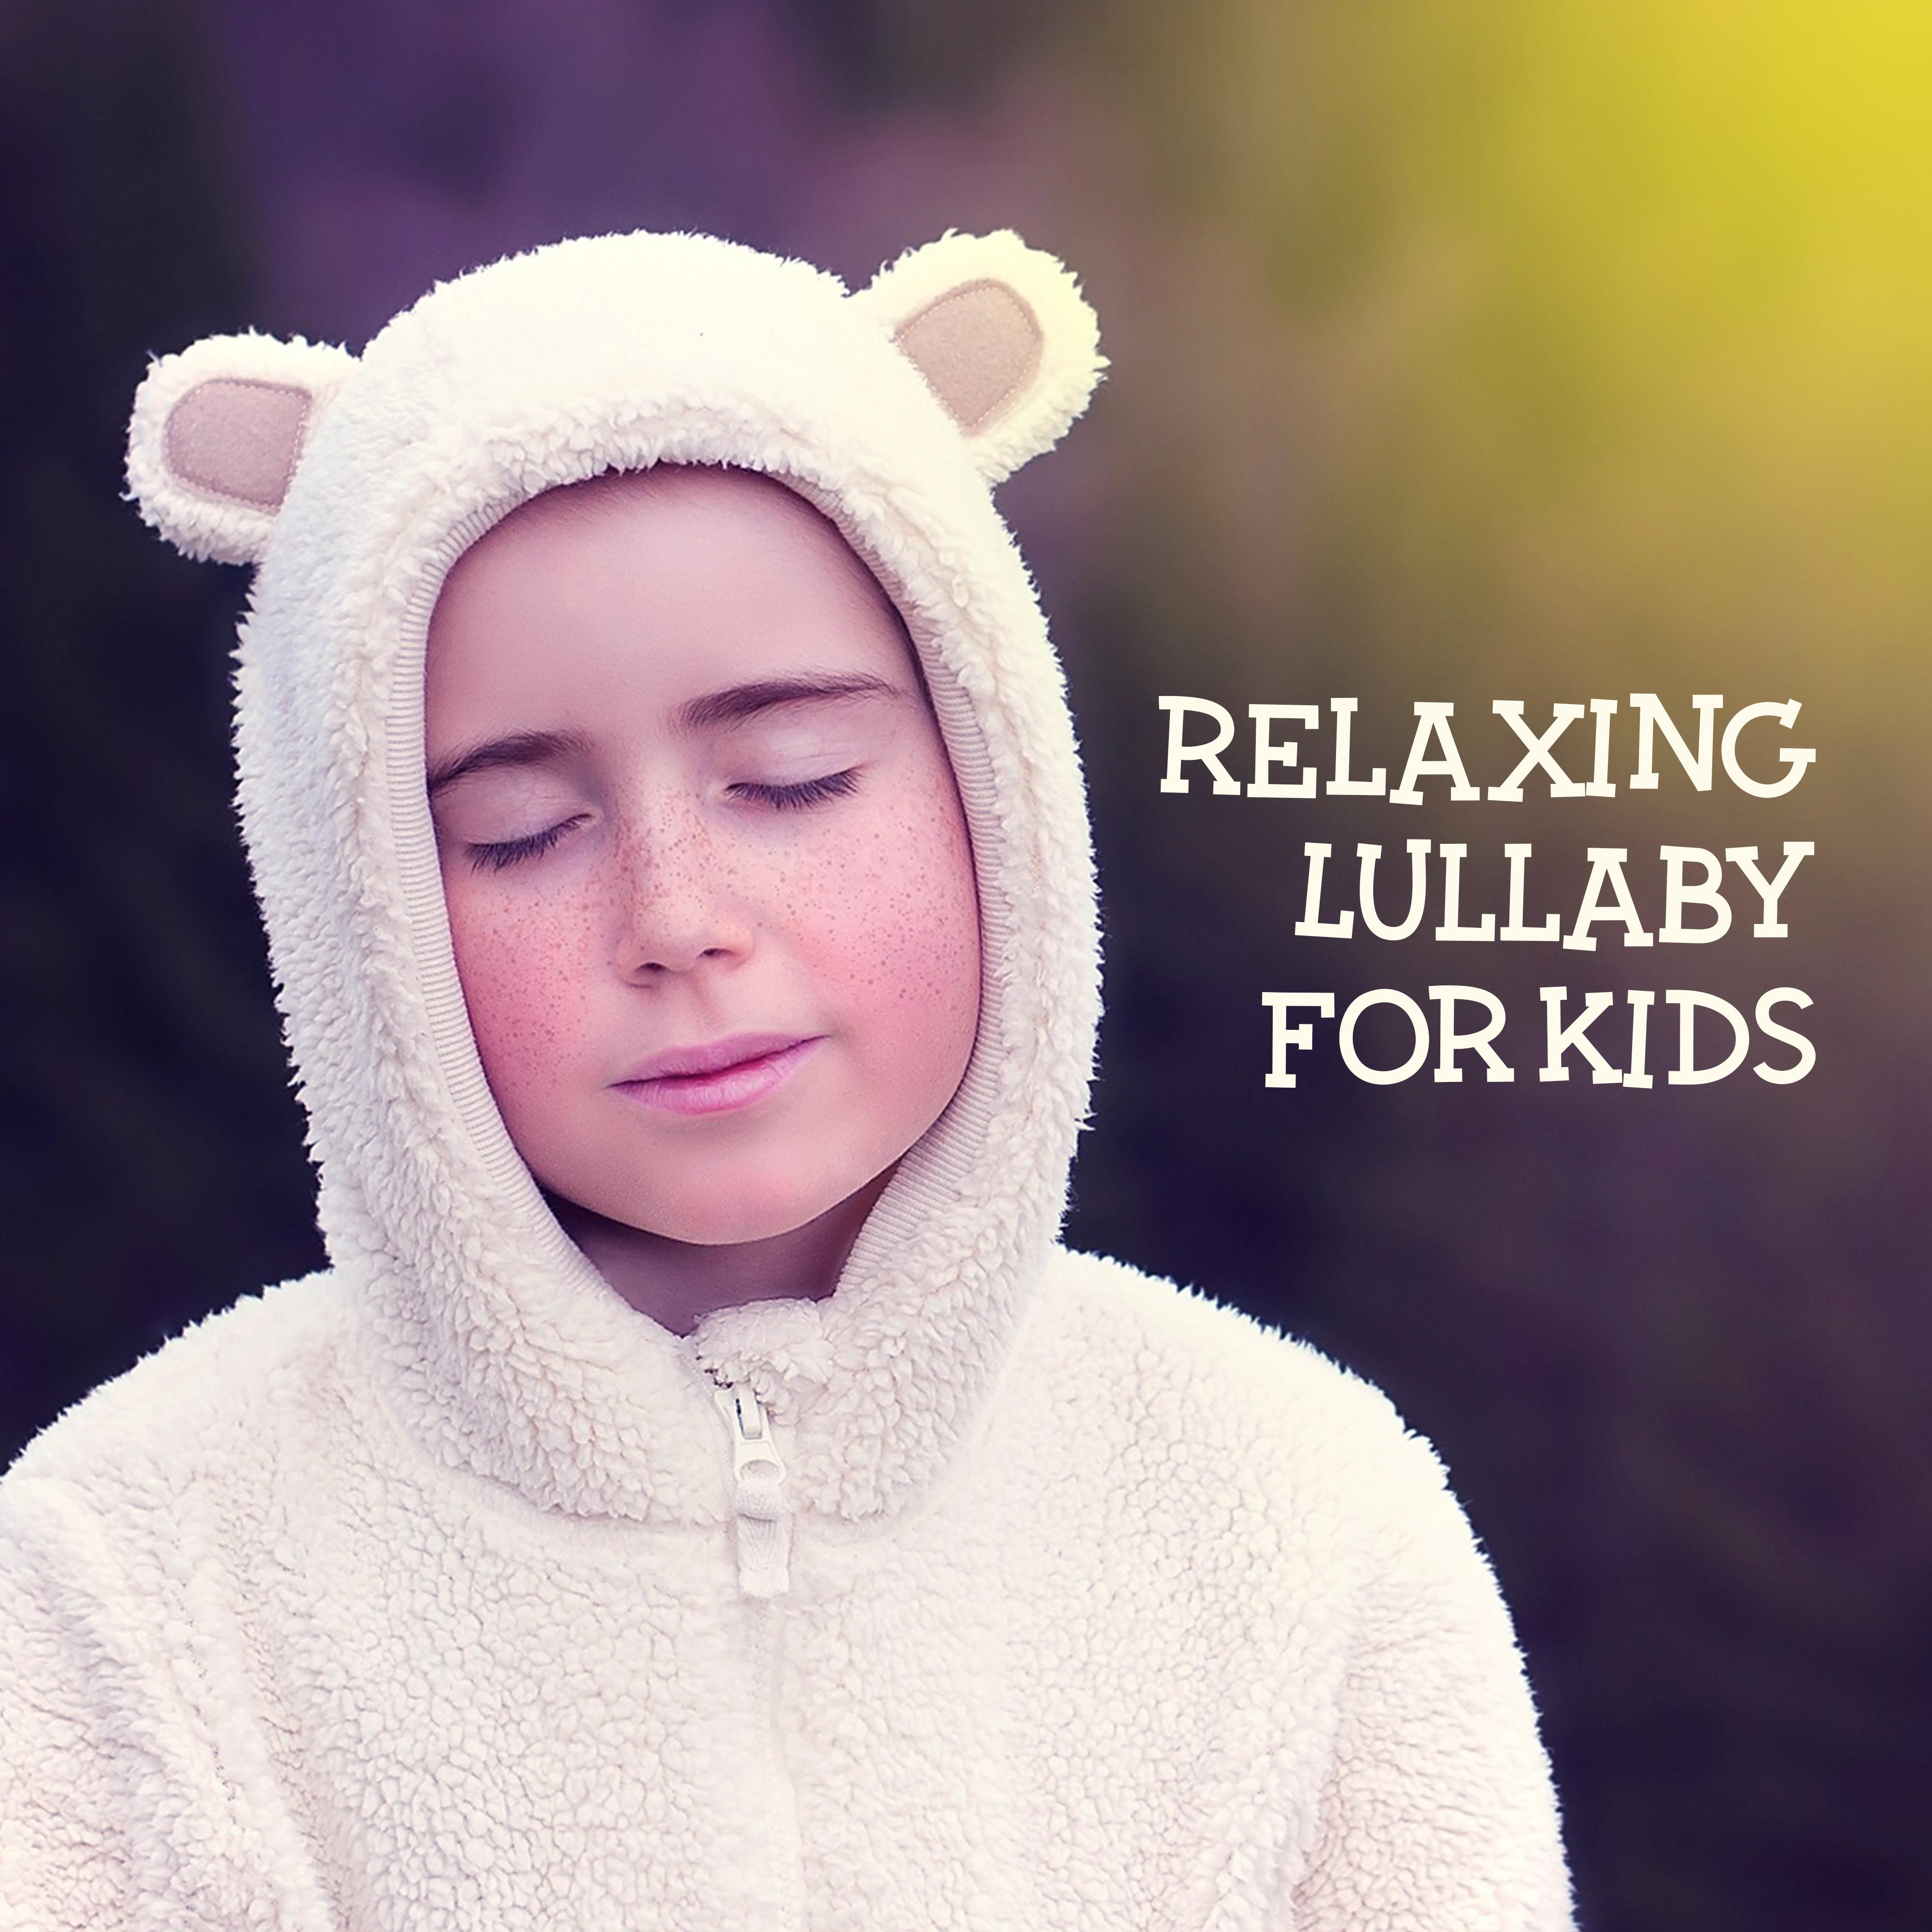 Relaxing Lullaby for Kids  Restful Sleep, Calming Melodies to Bed, Sweet Dreams, Cradle Songs